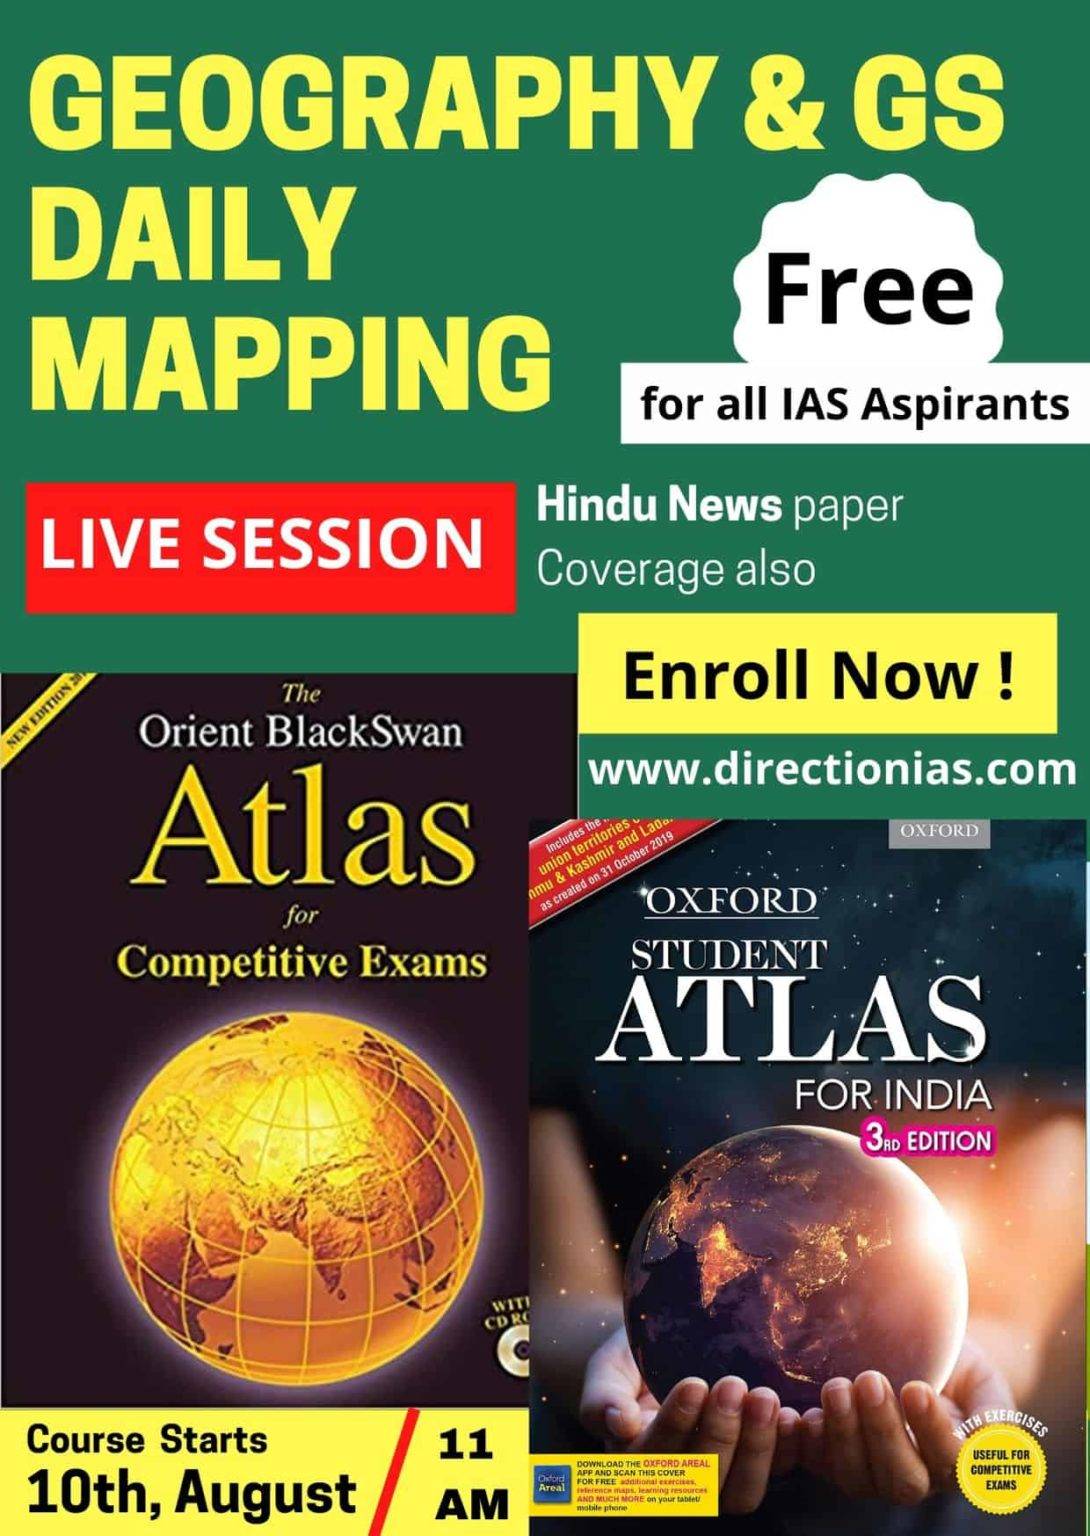 GS – Geography Mapping Classes India & World